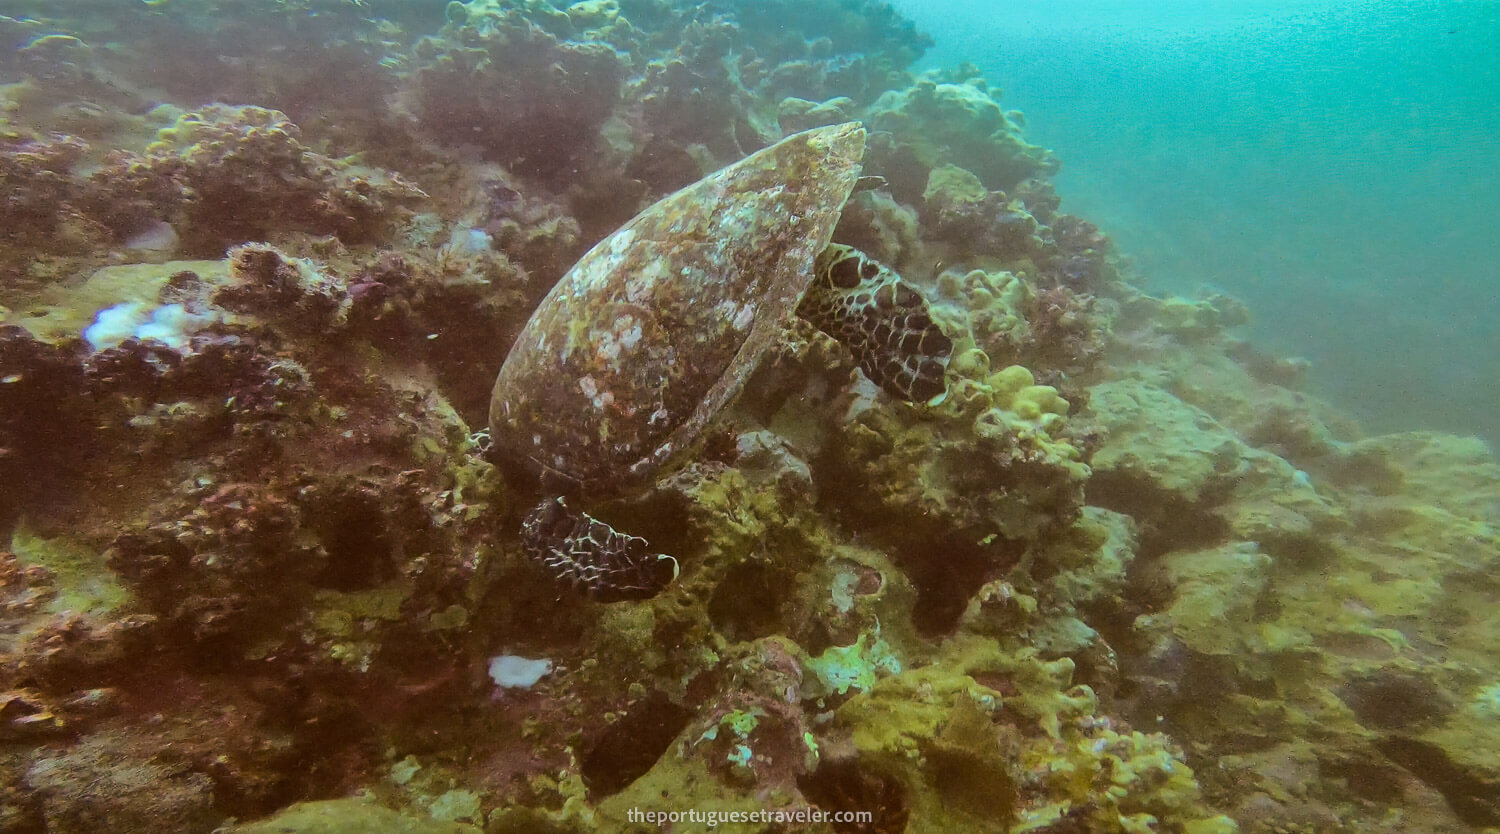 A turtle eating corals on the first dive